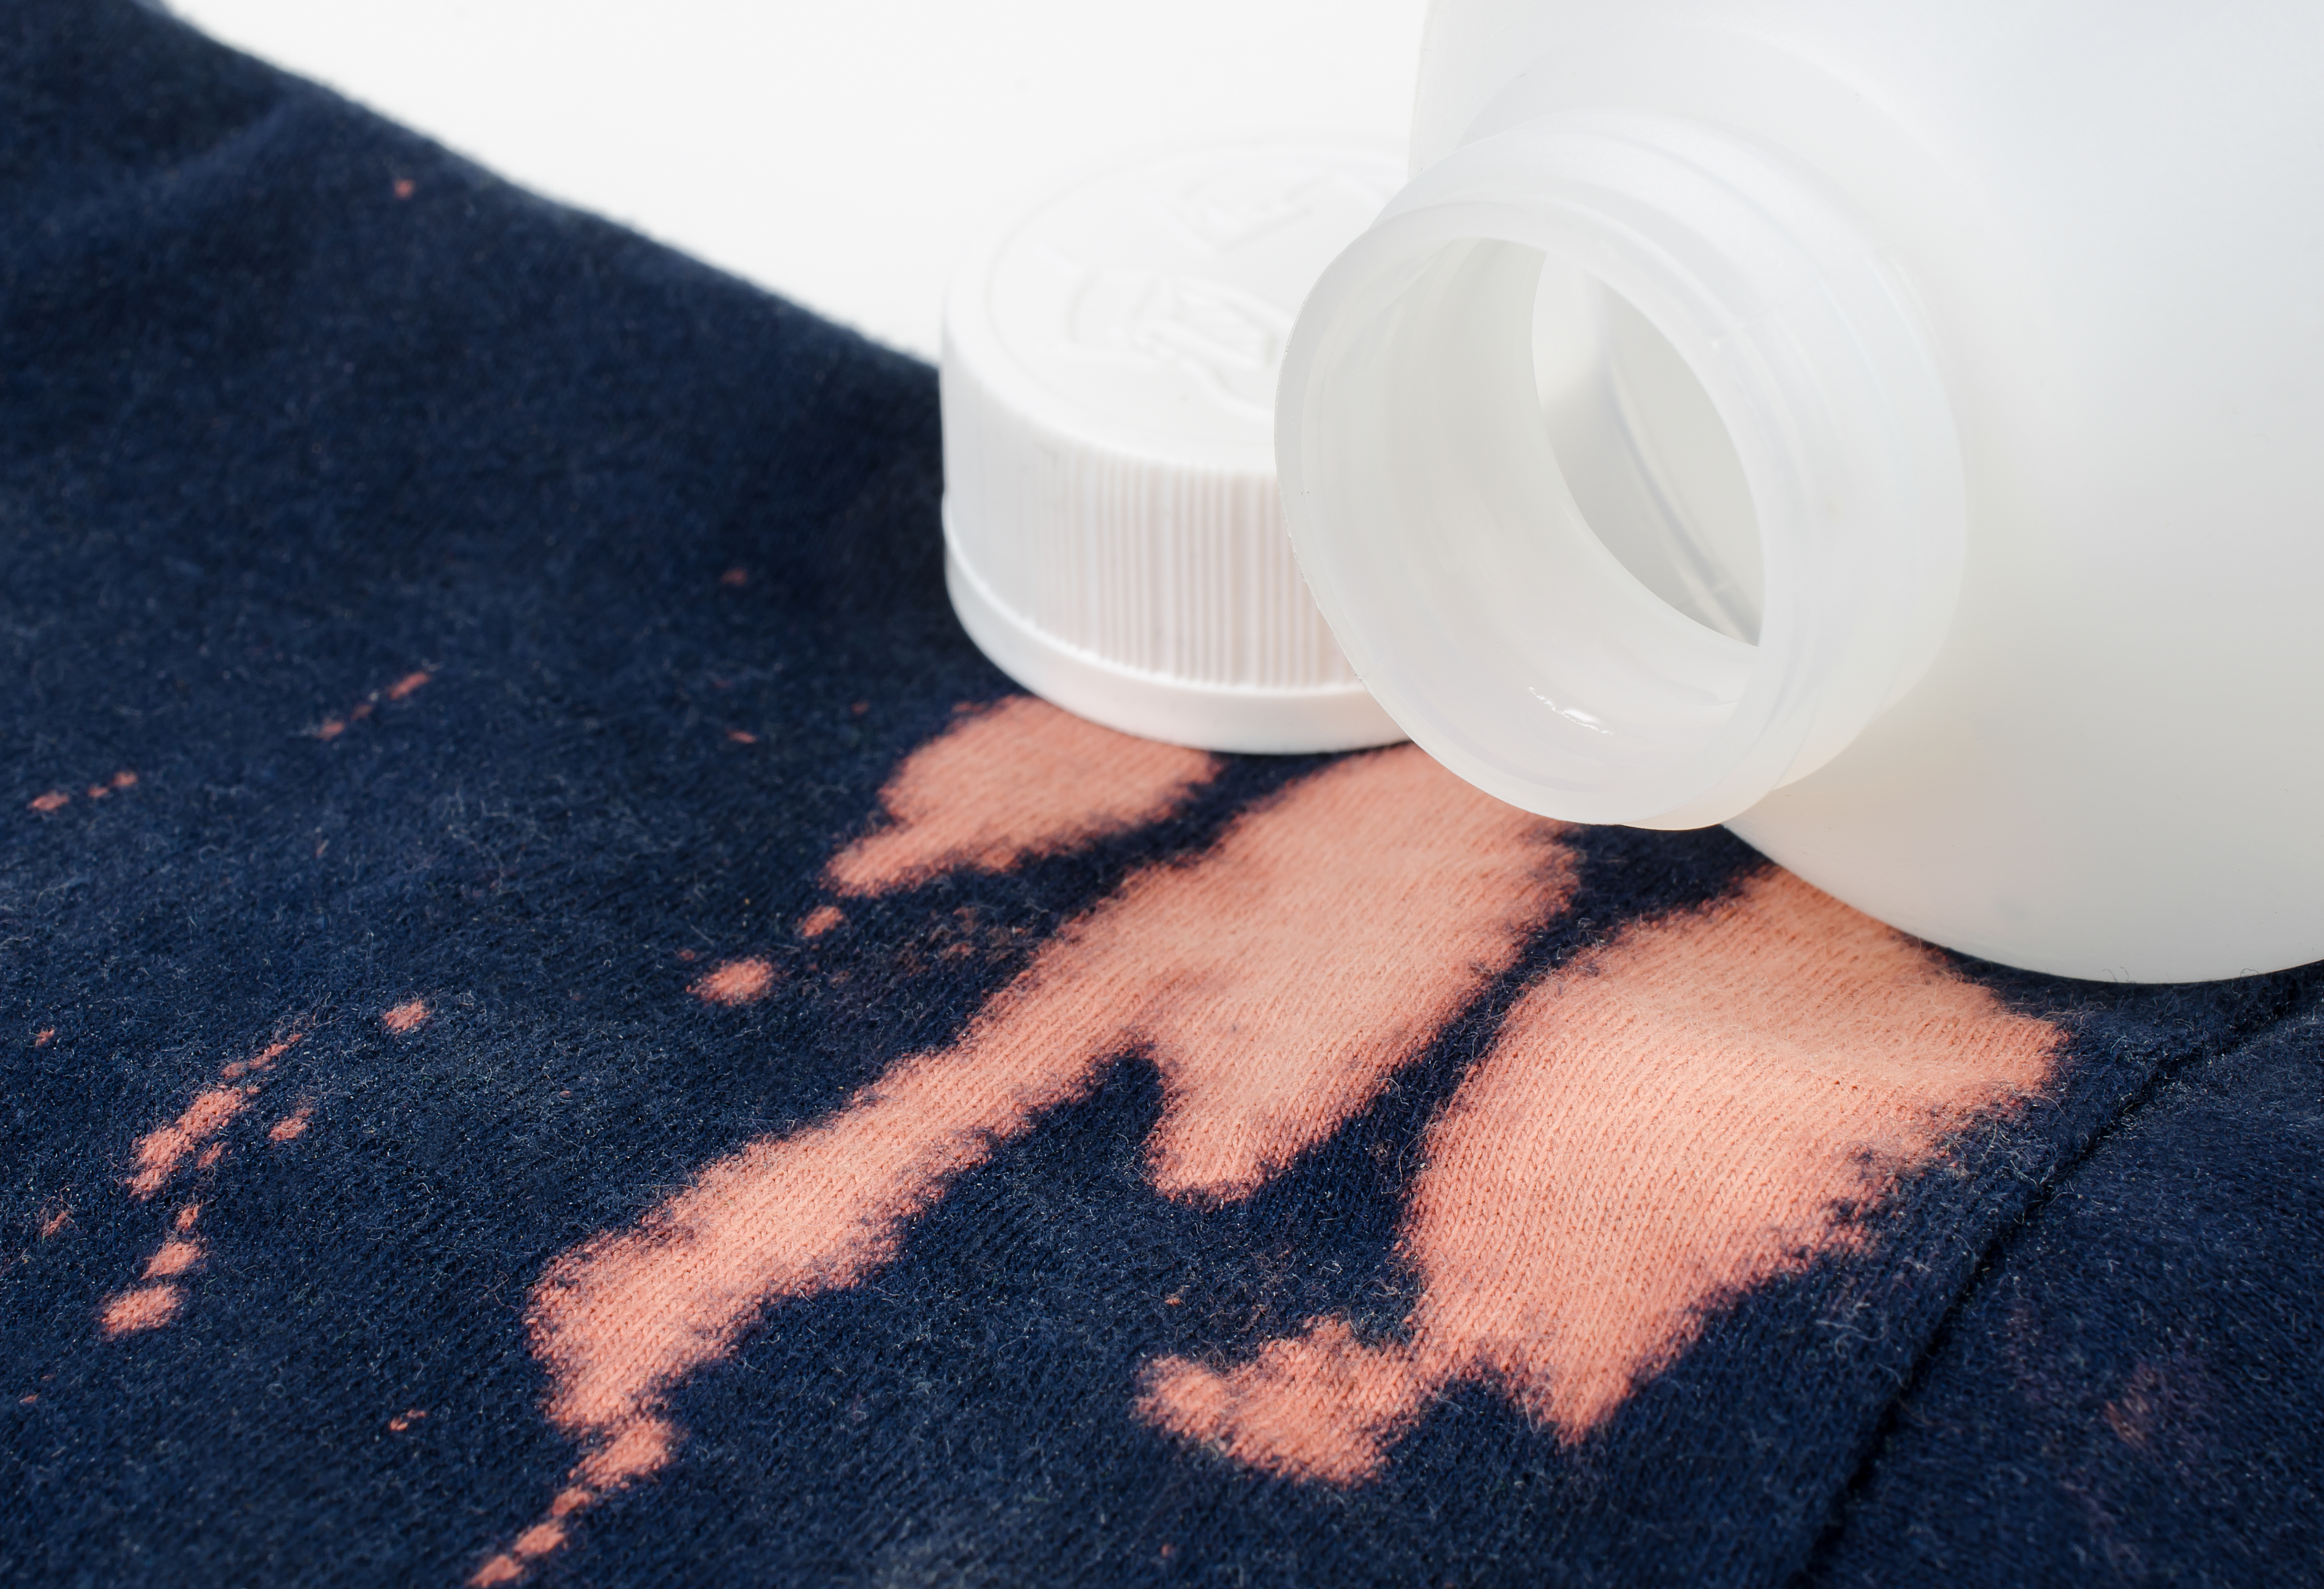 Benzoyl Peroxide stains on clothes. | Source: Shutterstock